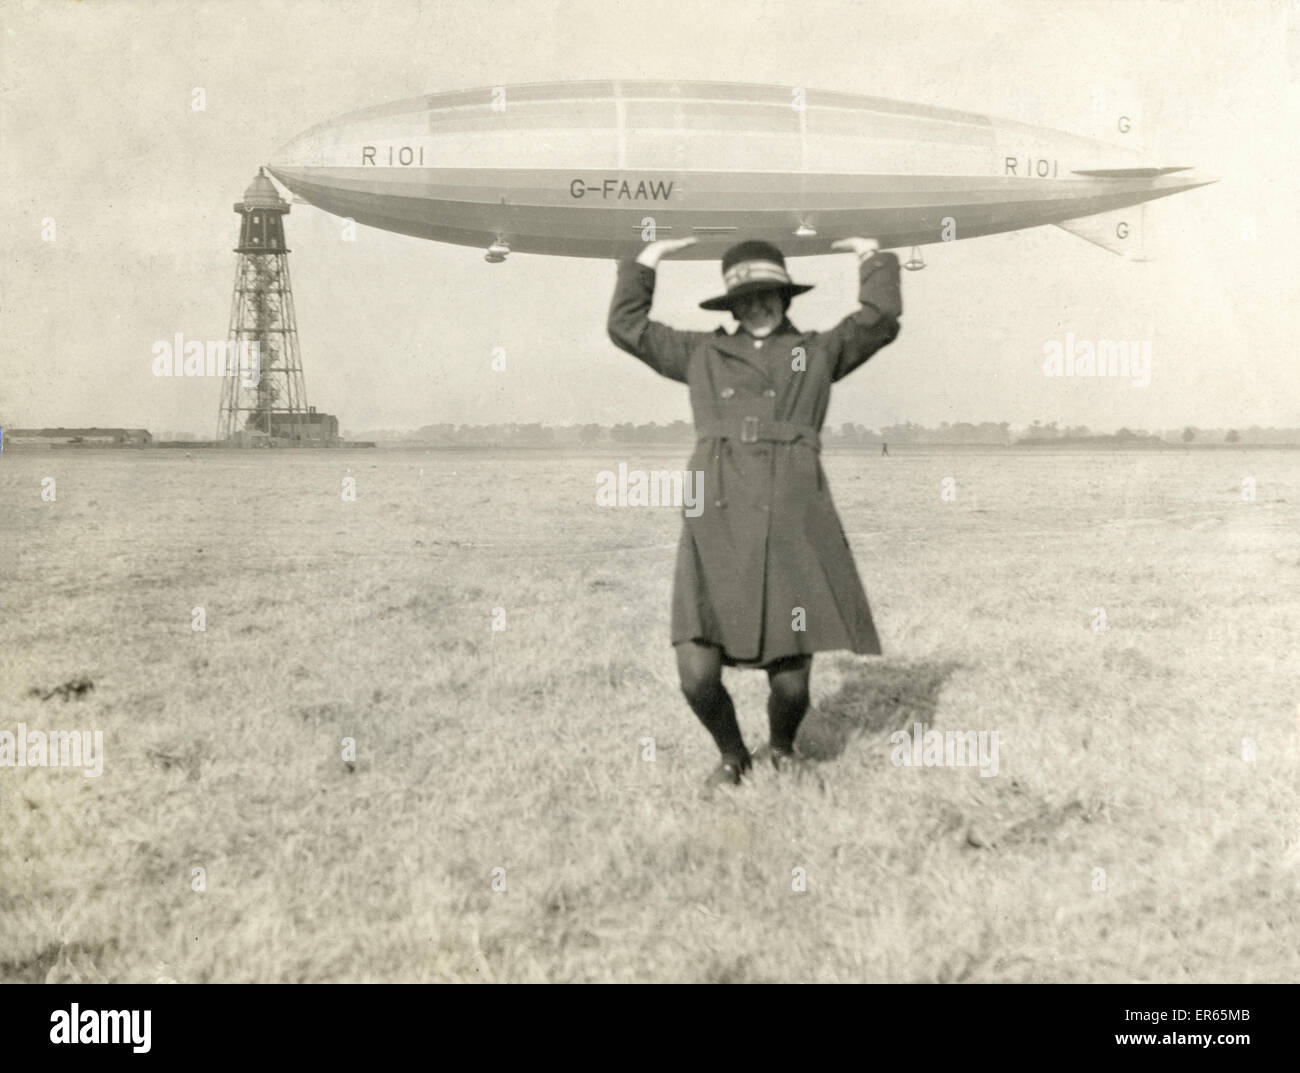 A member of the WAAC - the Women's Army Auxiliary Corp - 'holds up' the R101 Airship, riding at her home mast at Cardington, Bedford. R101 was a British rigid airship completed in 1929 as part of the Imperial Airship Scheme. After initial flights and two Stock Photo